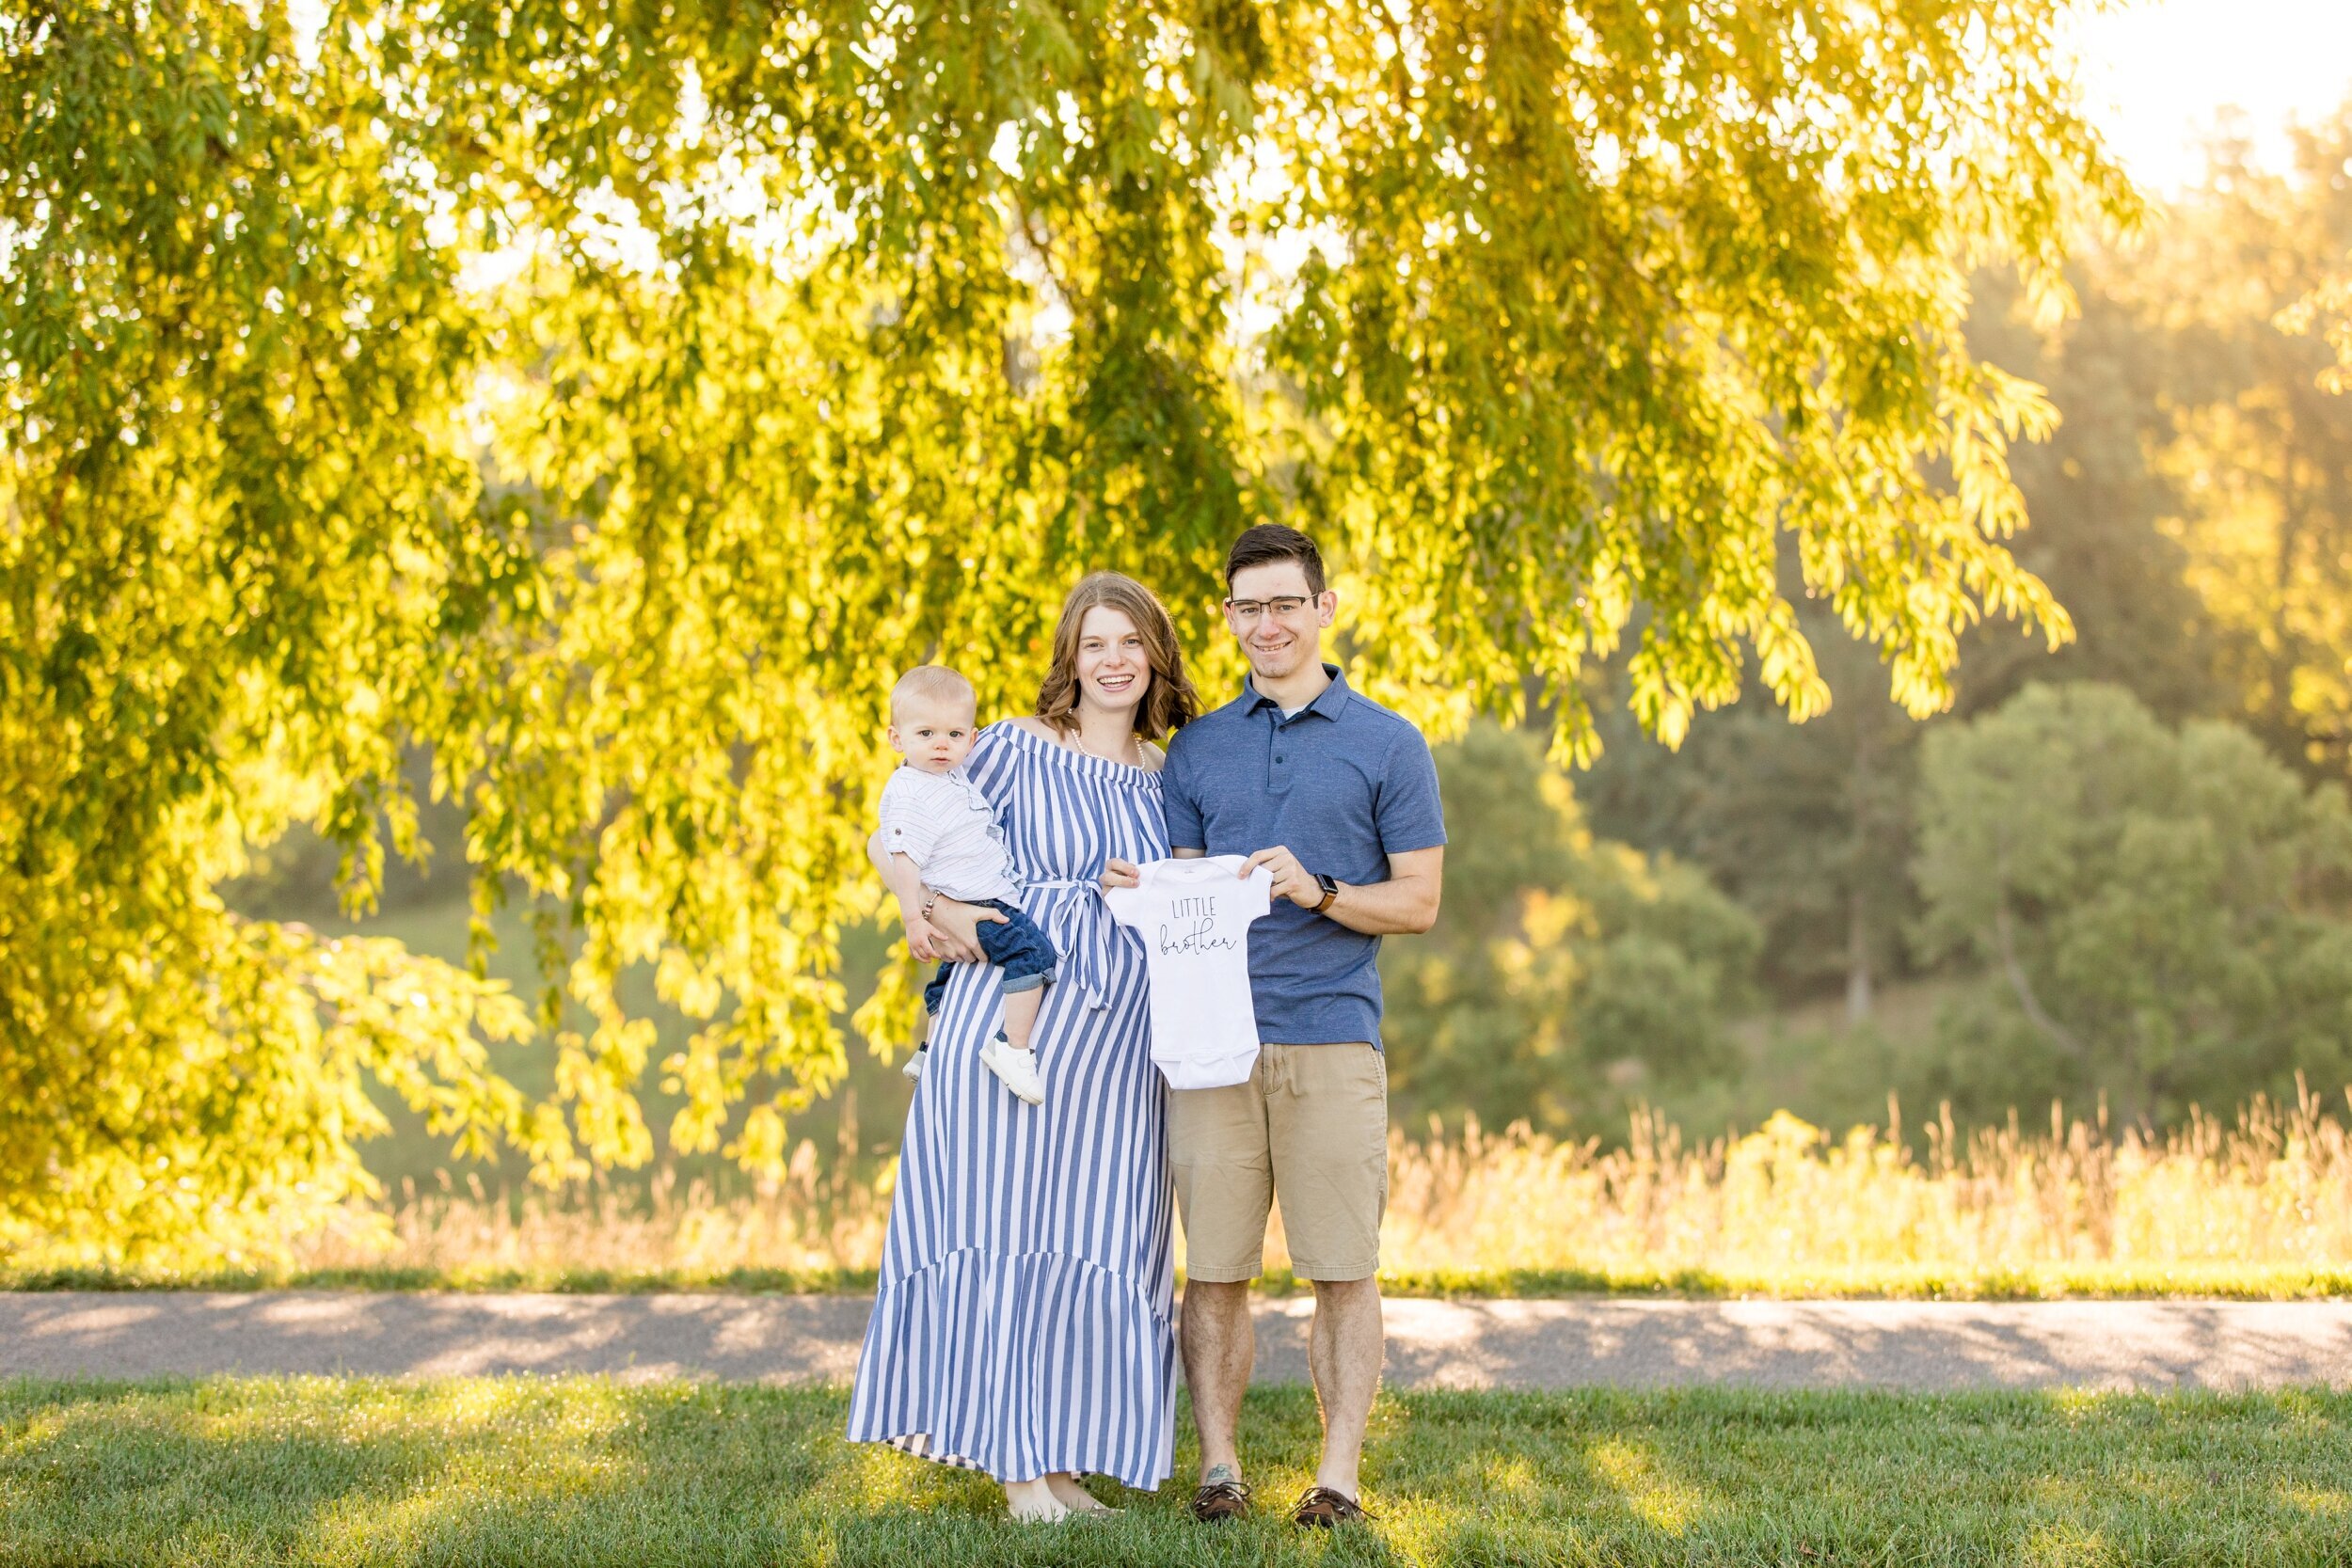 location ideas for photo sessions near cranberry township and zelienople, cranberry township photographer, zelienople photographer, north pittsburgh photographer, north boundary park family photos